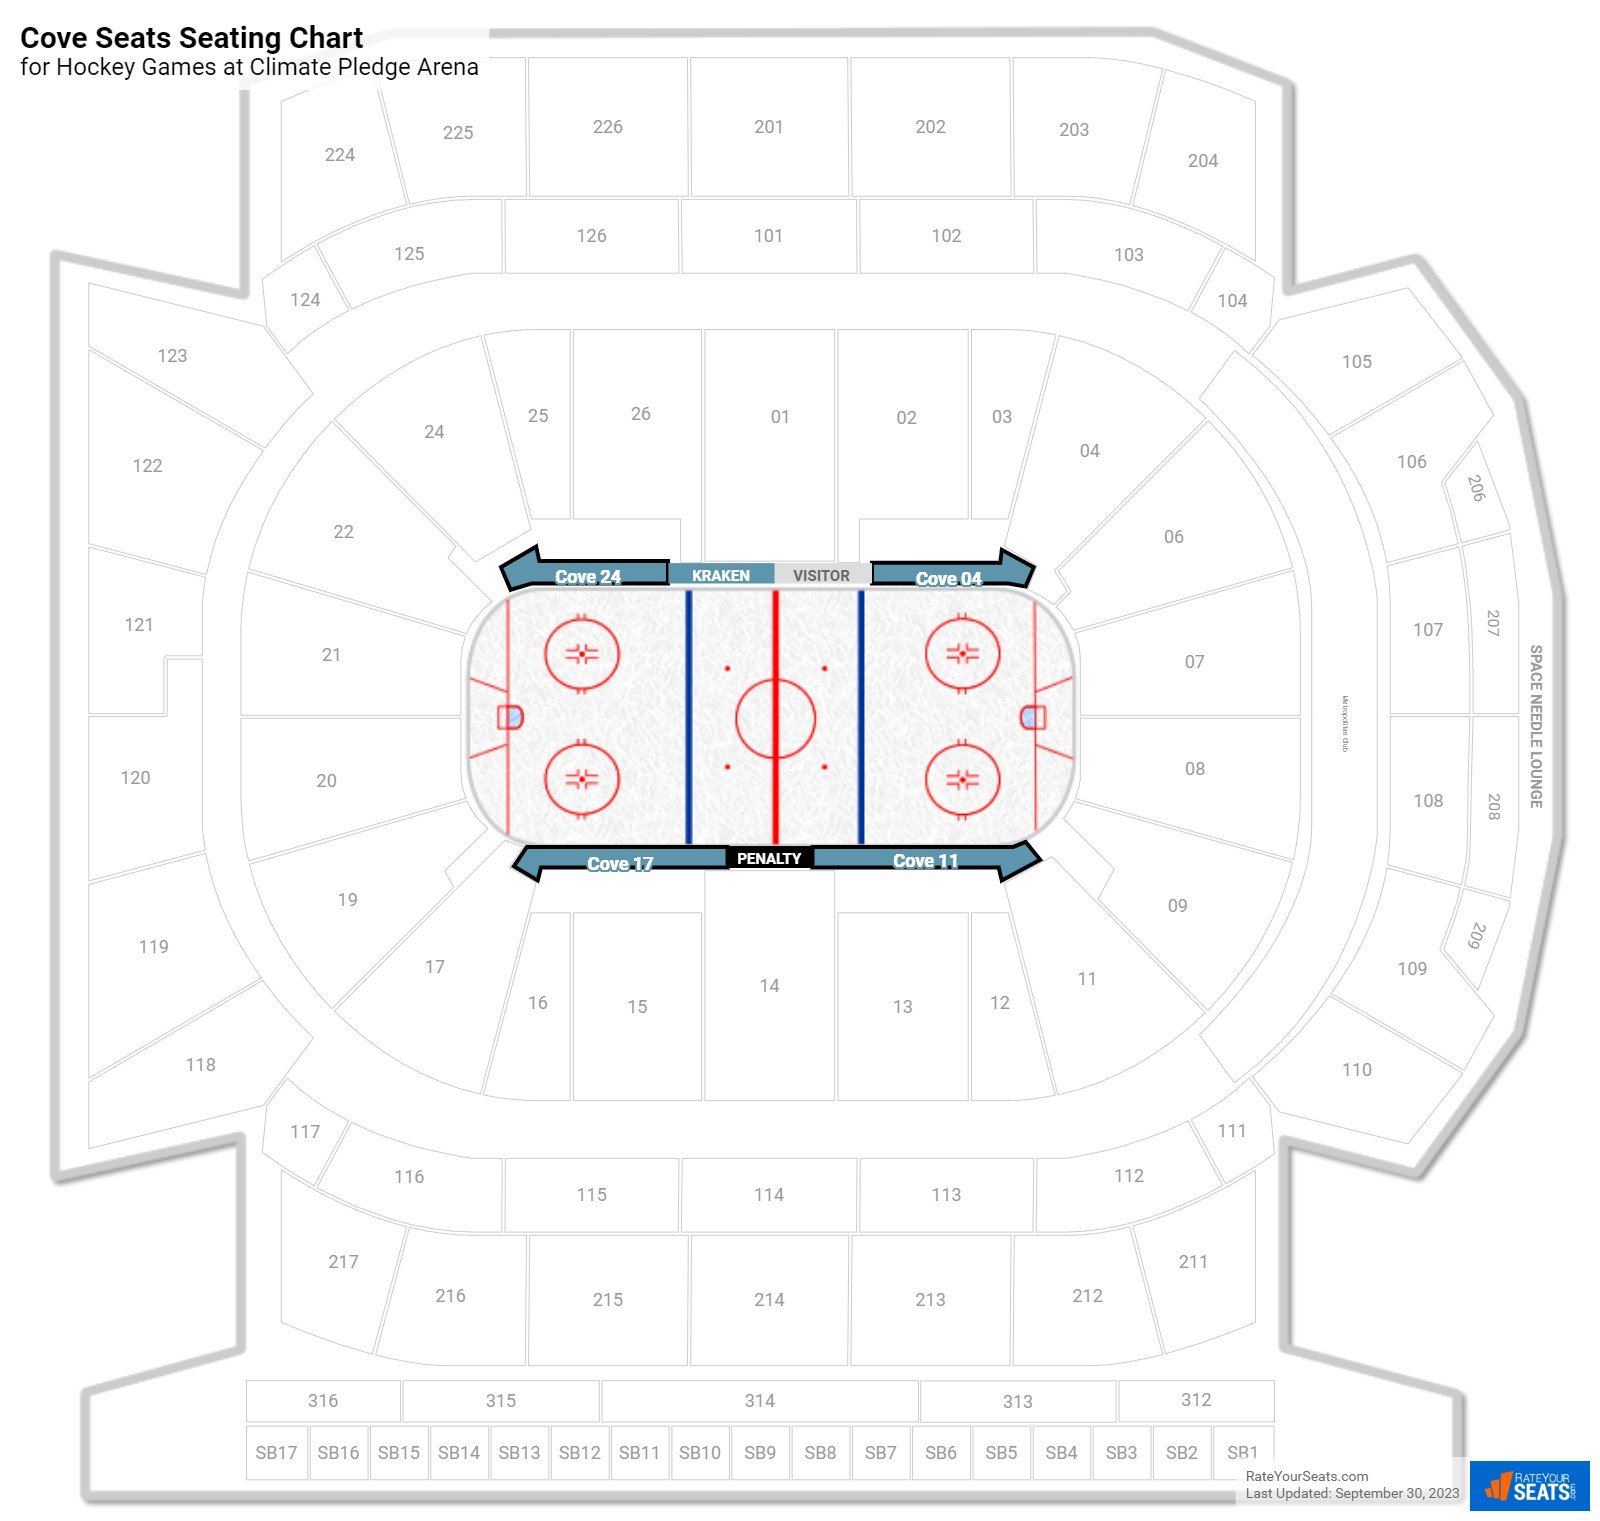 Hockey Ice Seats Seating Chart at Climate Pledge Arena